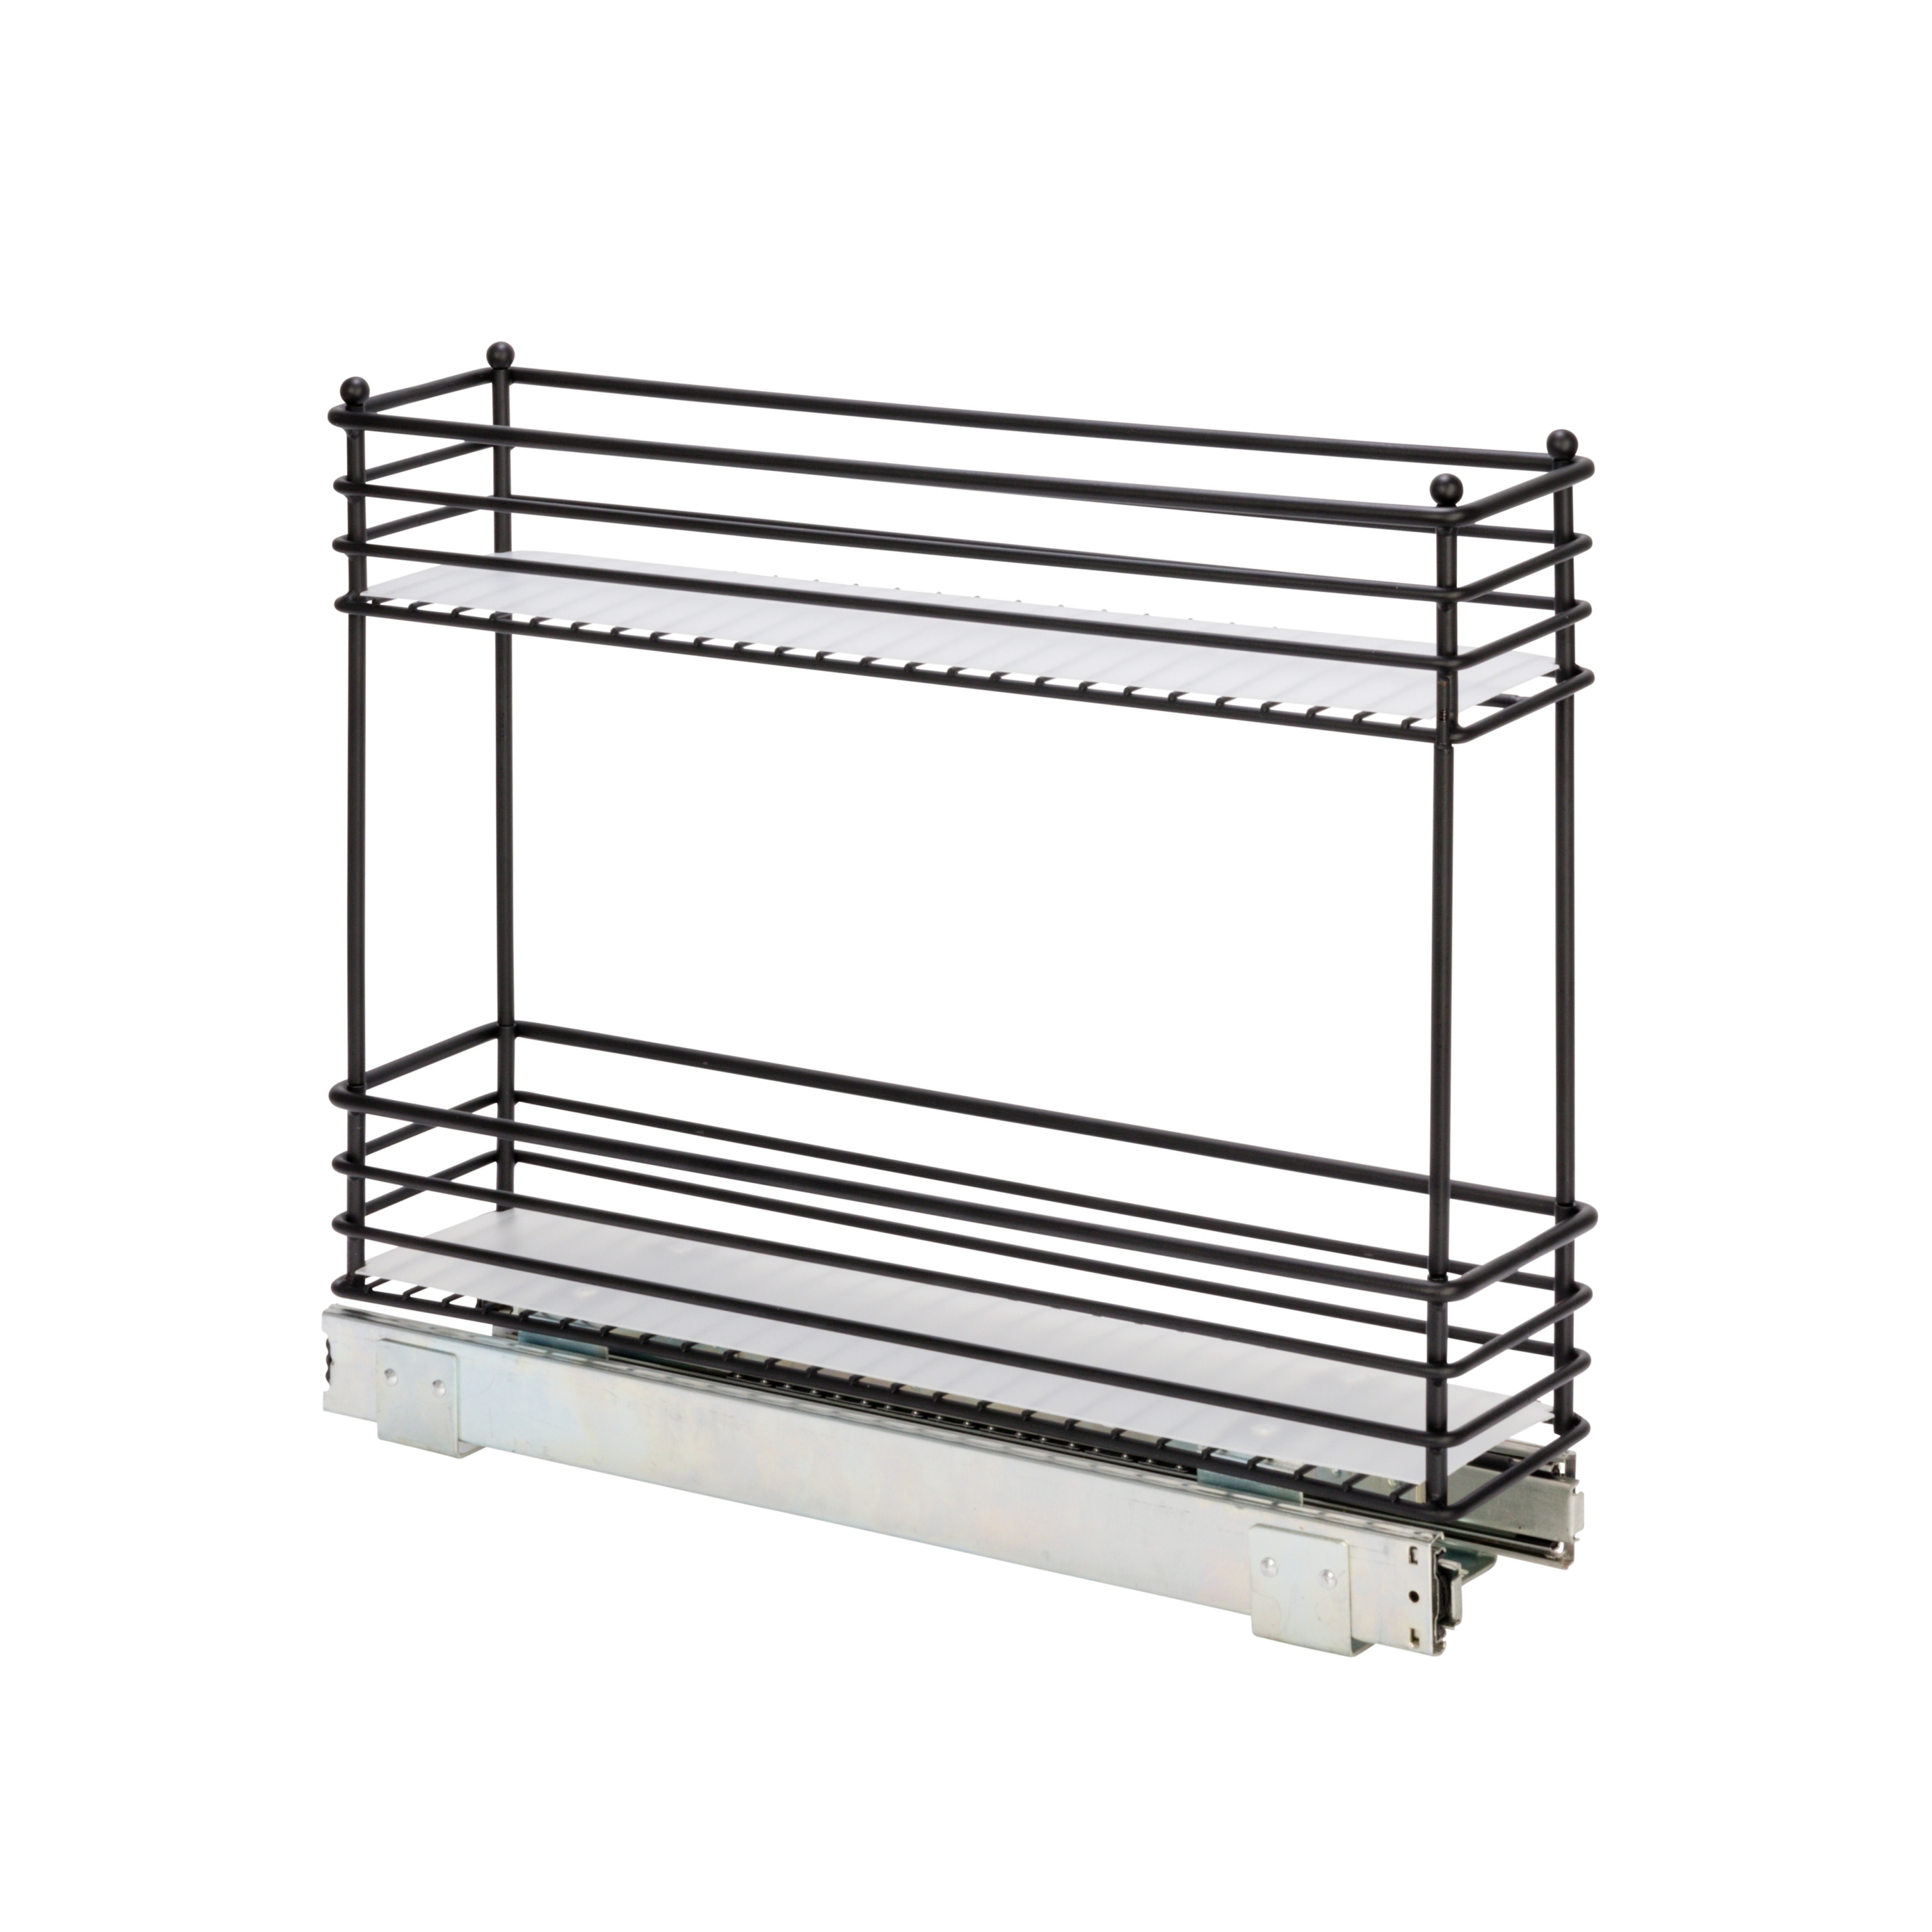 https://ak1.ostkcdn.com/images/products/is/images/direct/2f42711dfc47ed437a53ae30407c2f43b1306076/Glidez-Pull-Out-Slide-Out-Storage-Organizer-with-Plastic-Liners---2-Tier-Design.jpg